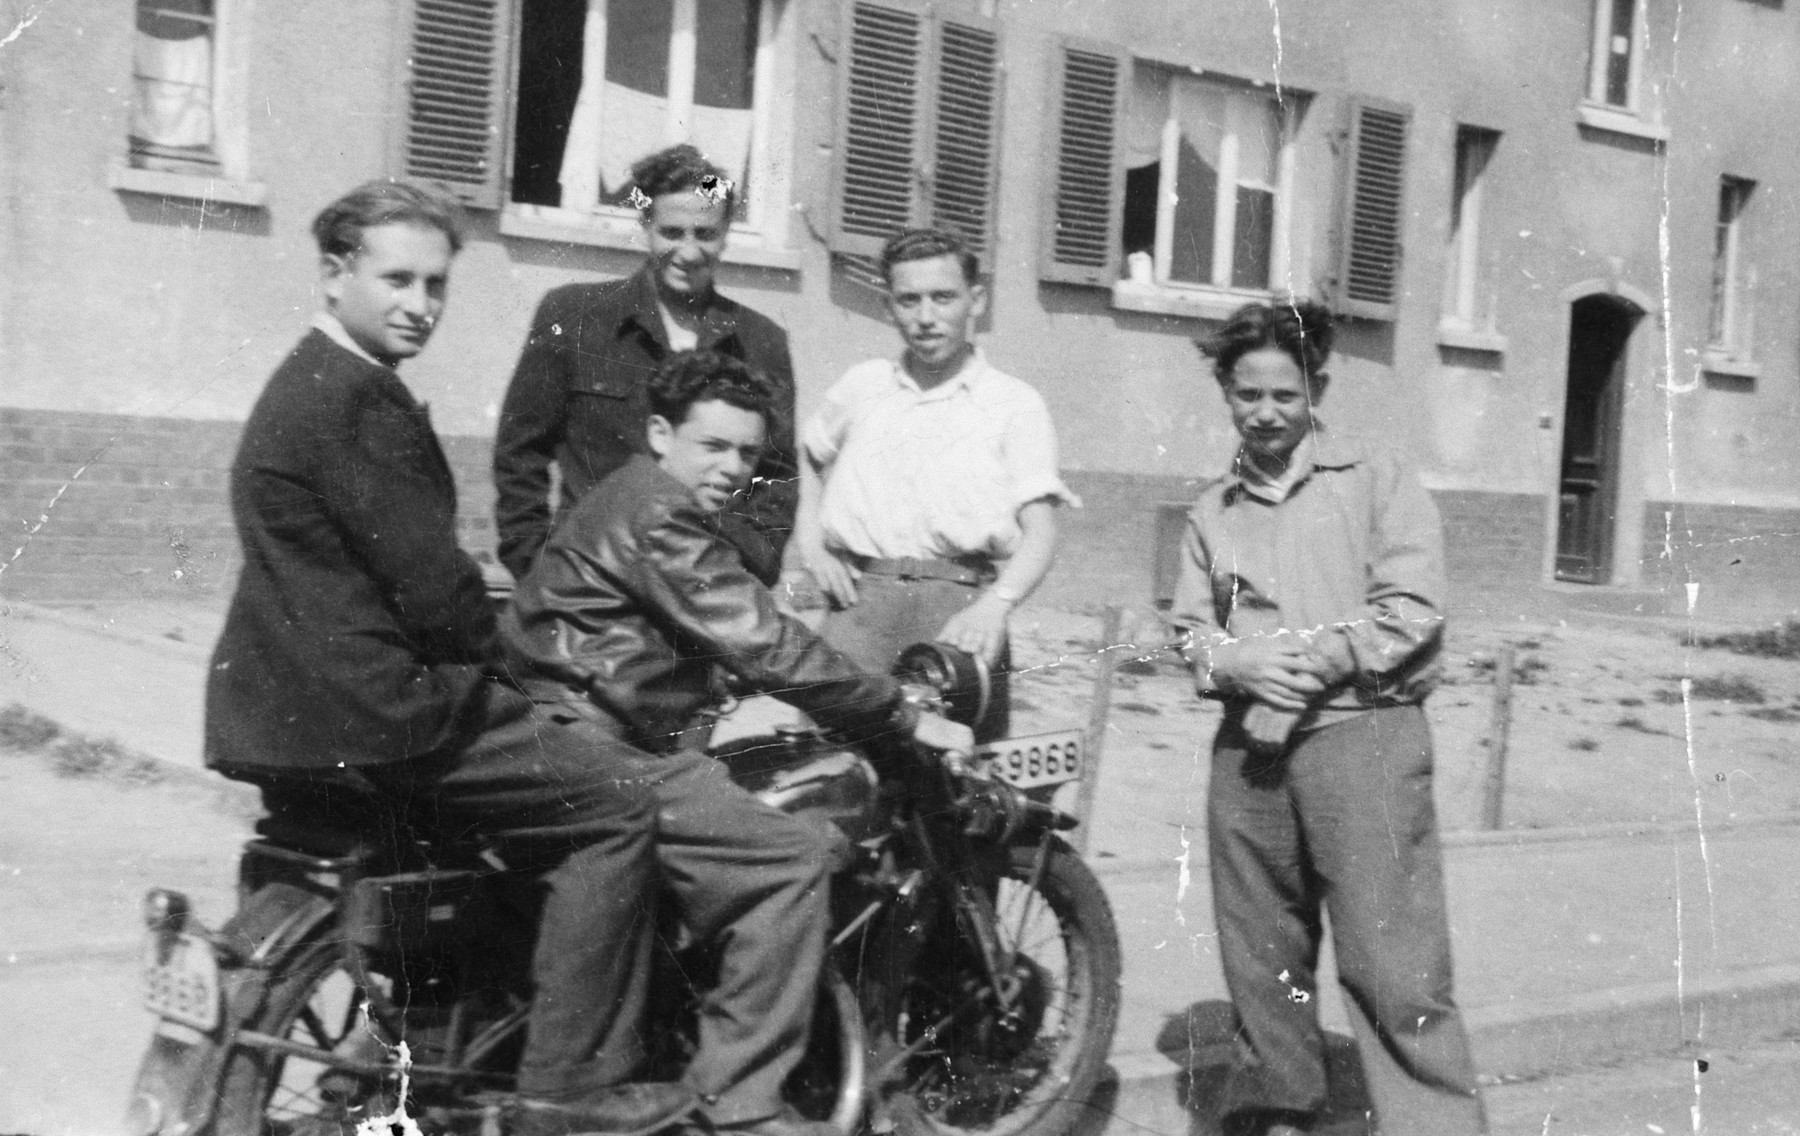 Five young men pose on or next to a motorcycle in the Zeilsheim displaced persons' camp.

Standing second from the left is Chuna Grynbaum.  Alex Herblum is on the motorcycle.